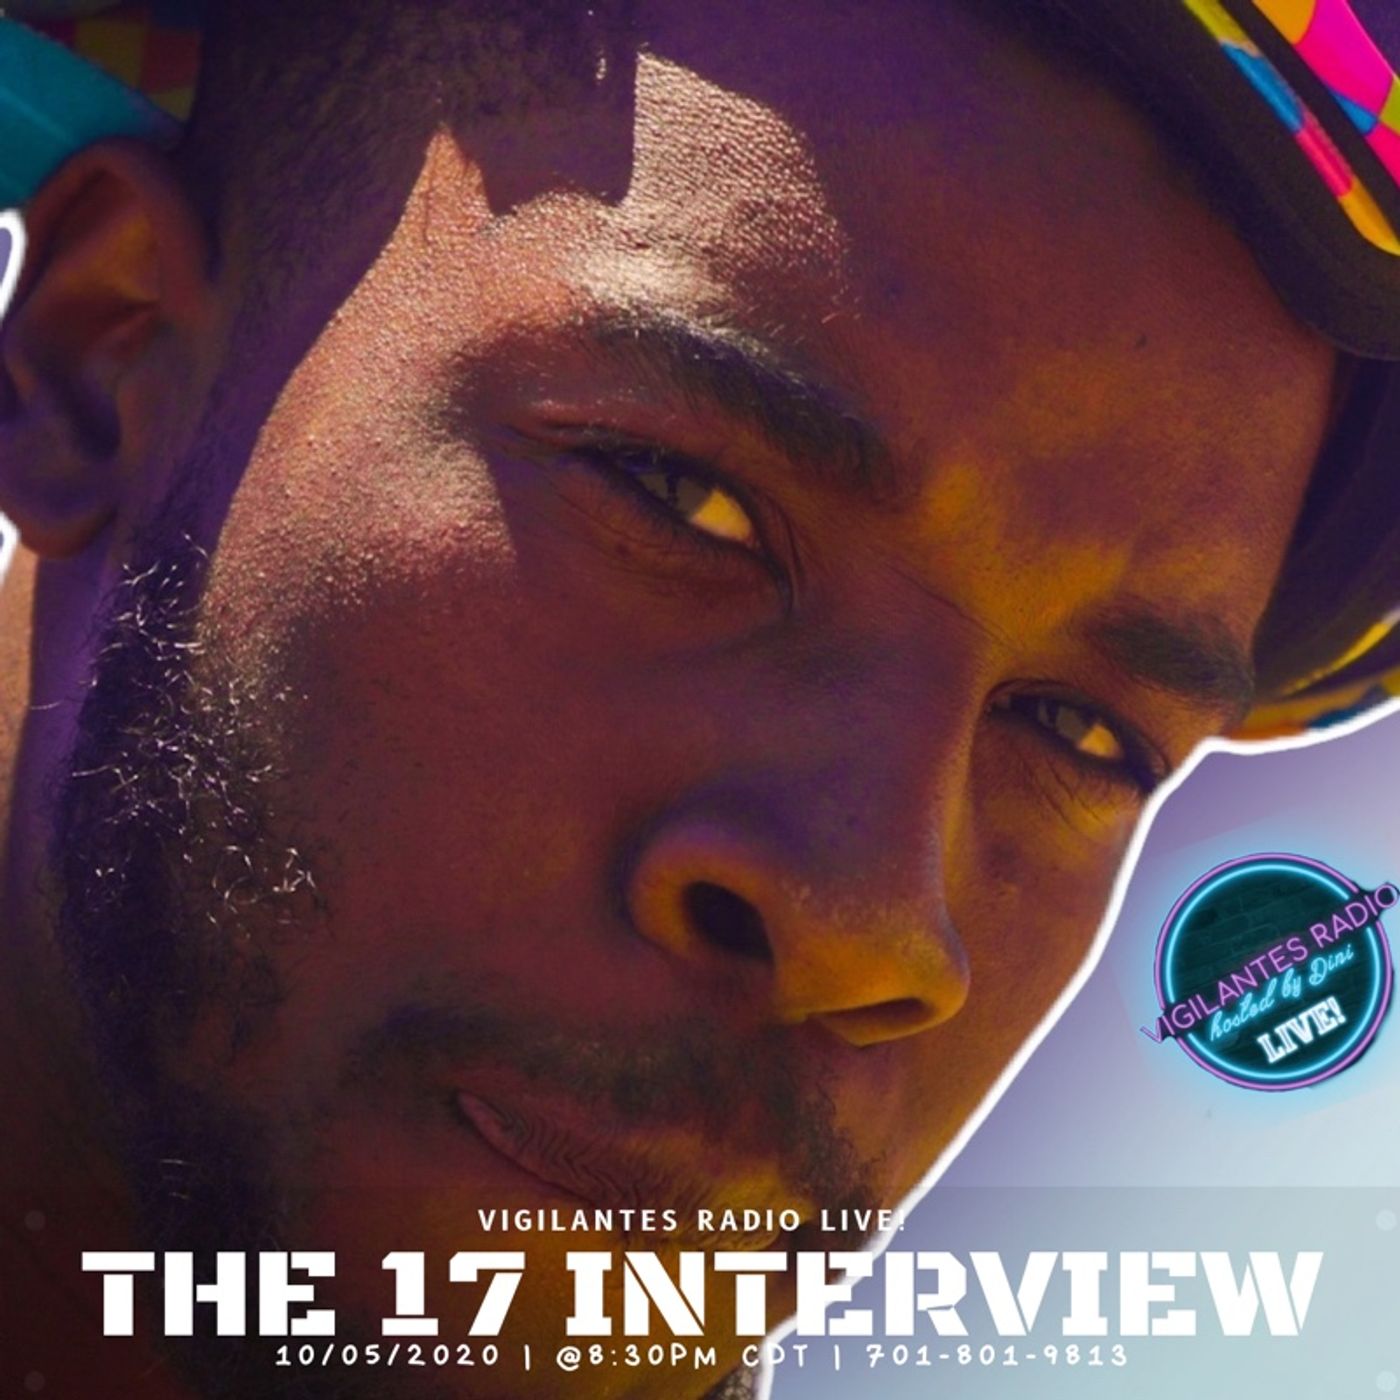 The 17 Interview. Image